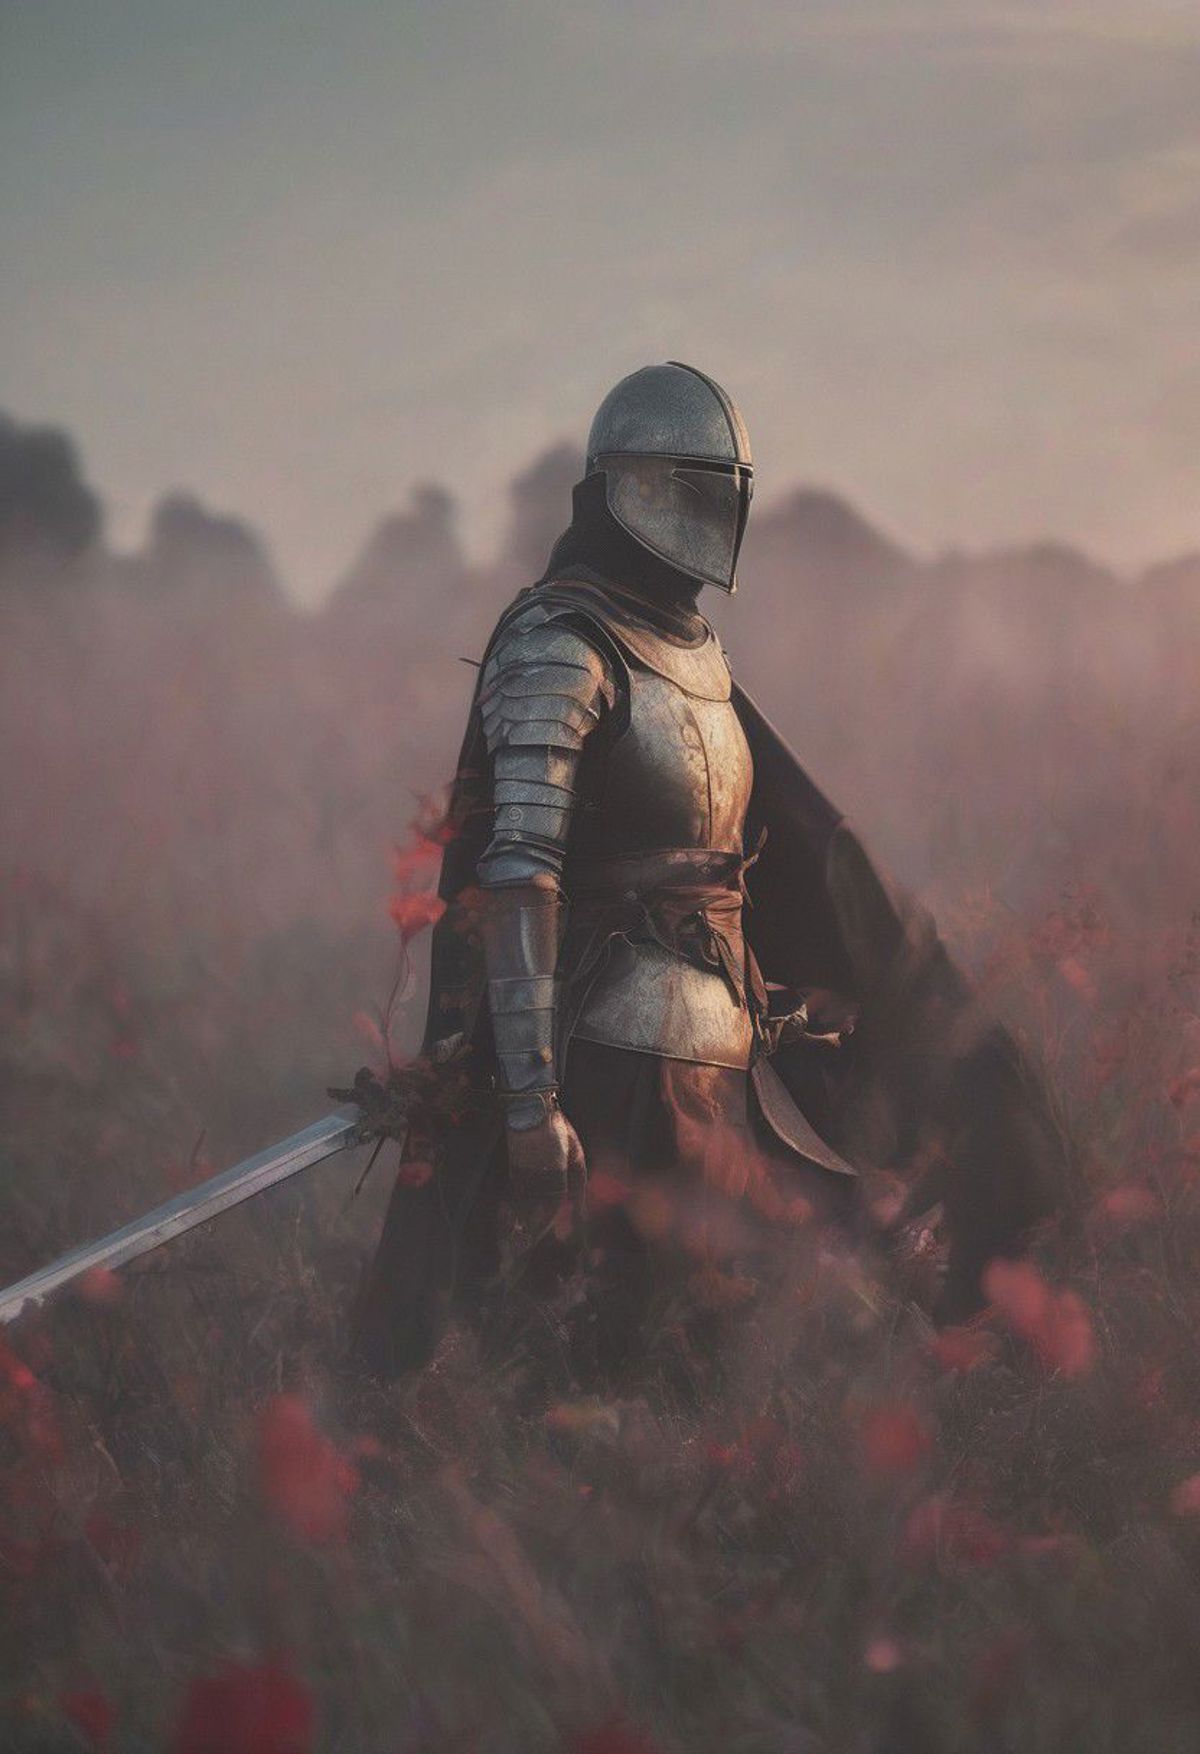 A knight in full armor standing in a field of flowers.